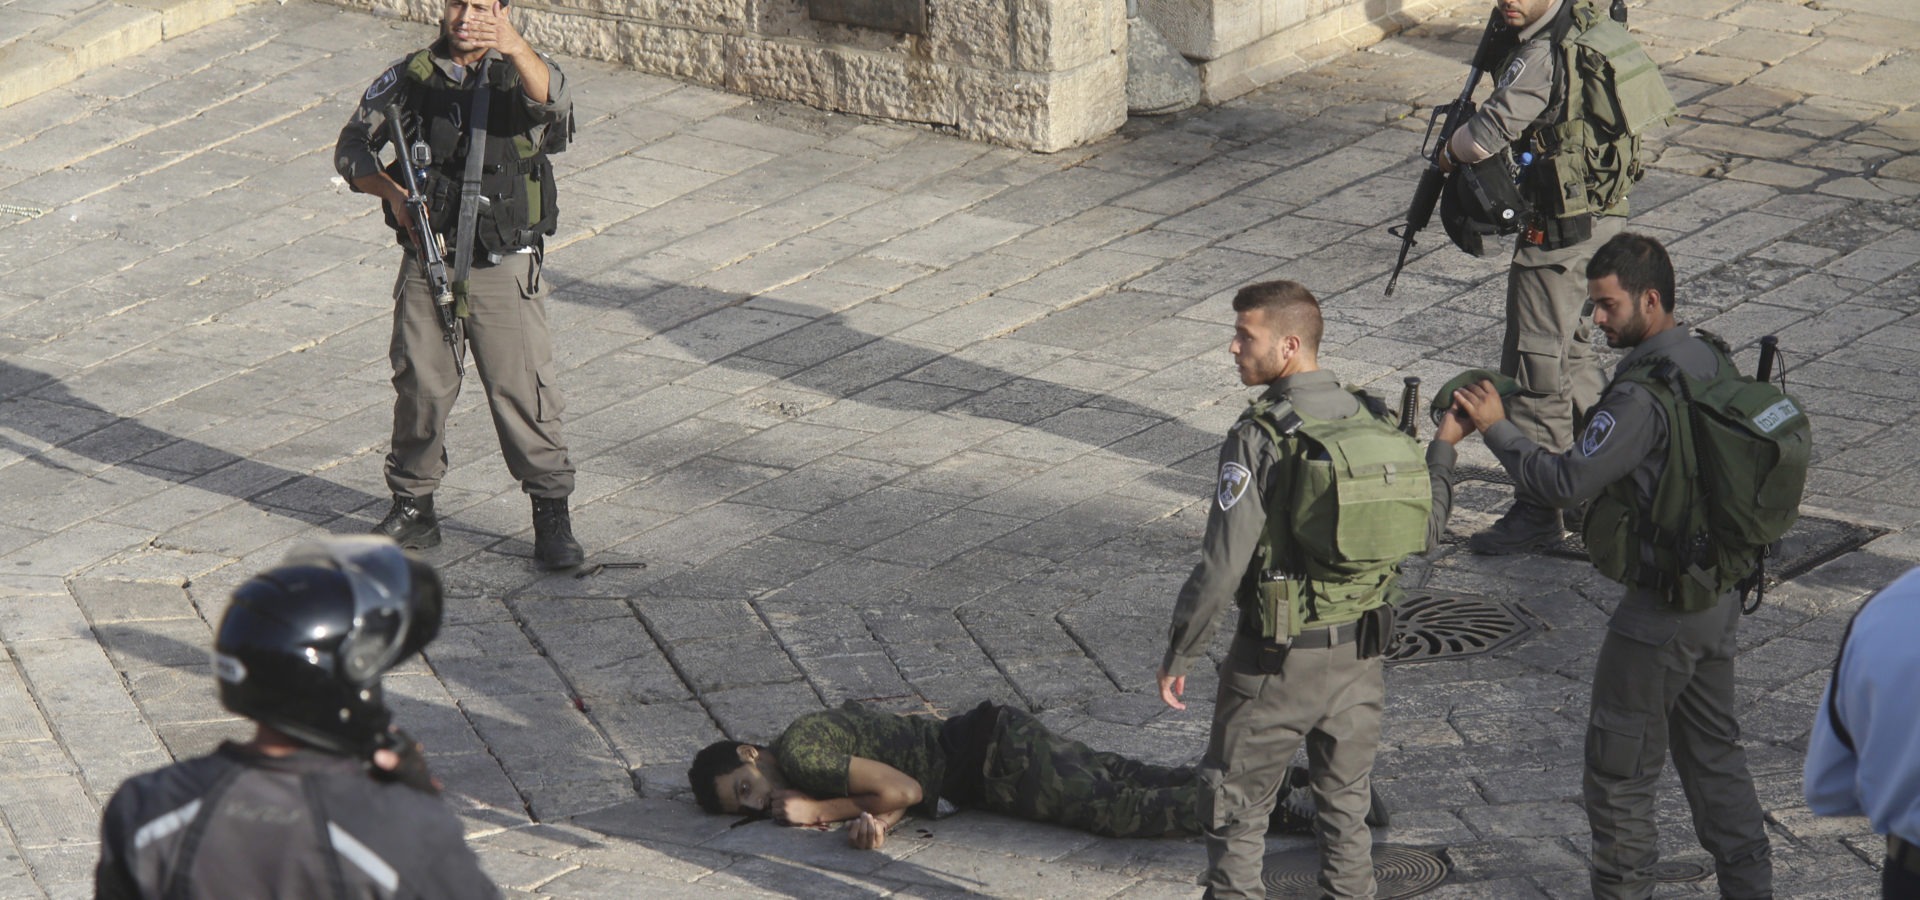 Israeli police stand around a Palestinian shot after he allegedly tried to stab a person at Damascus Gate of the Jerusalem's Old City, Wednesday, Oct. 14, 2015, Israeli police said. (AP Photo/Oren Ziv)